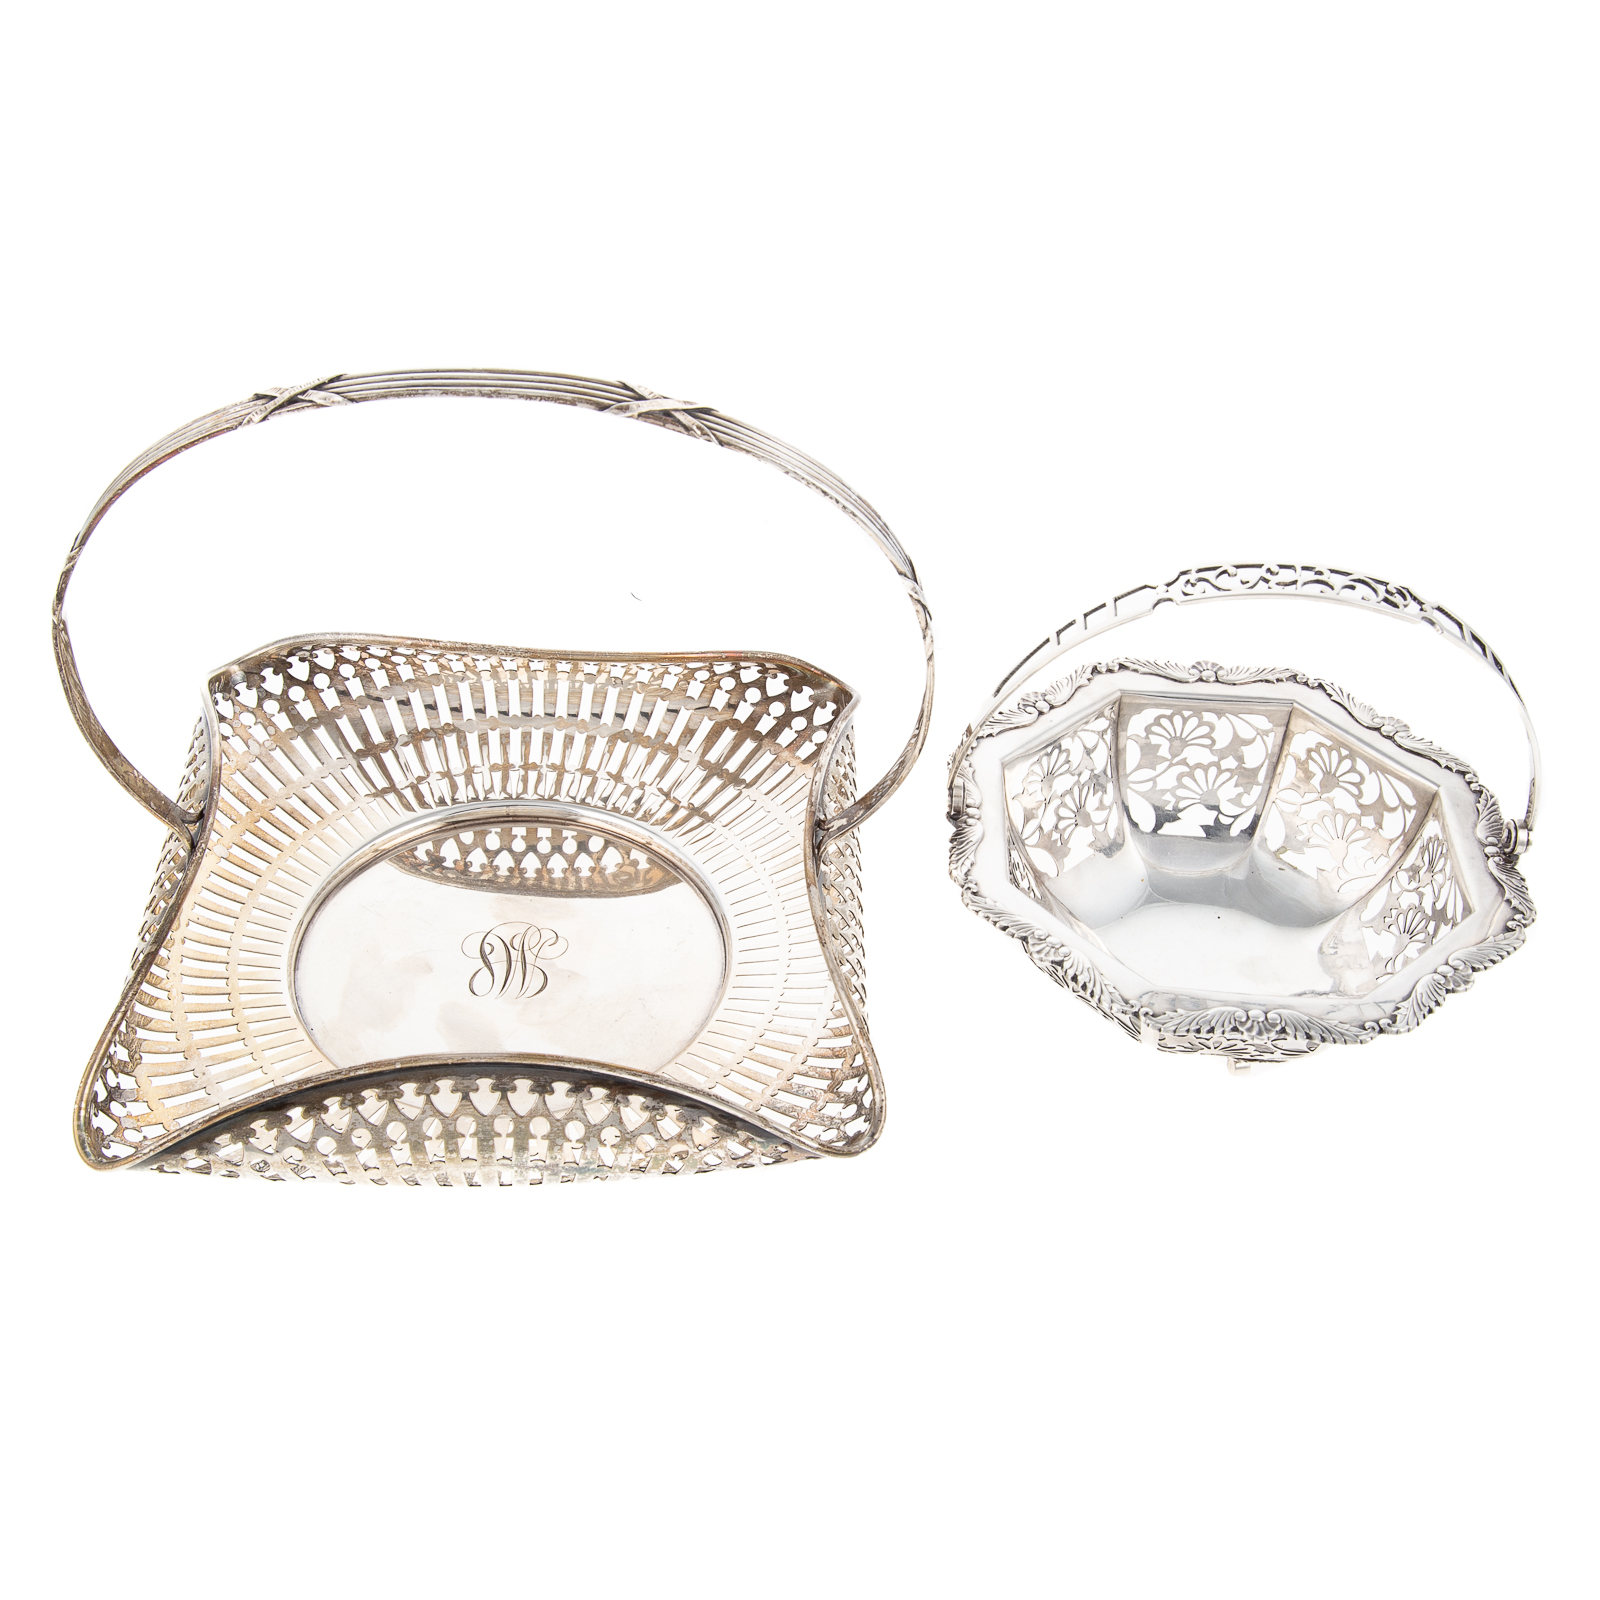 TWO STERLING BASKETS Including 288e24